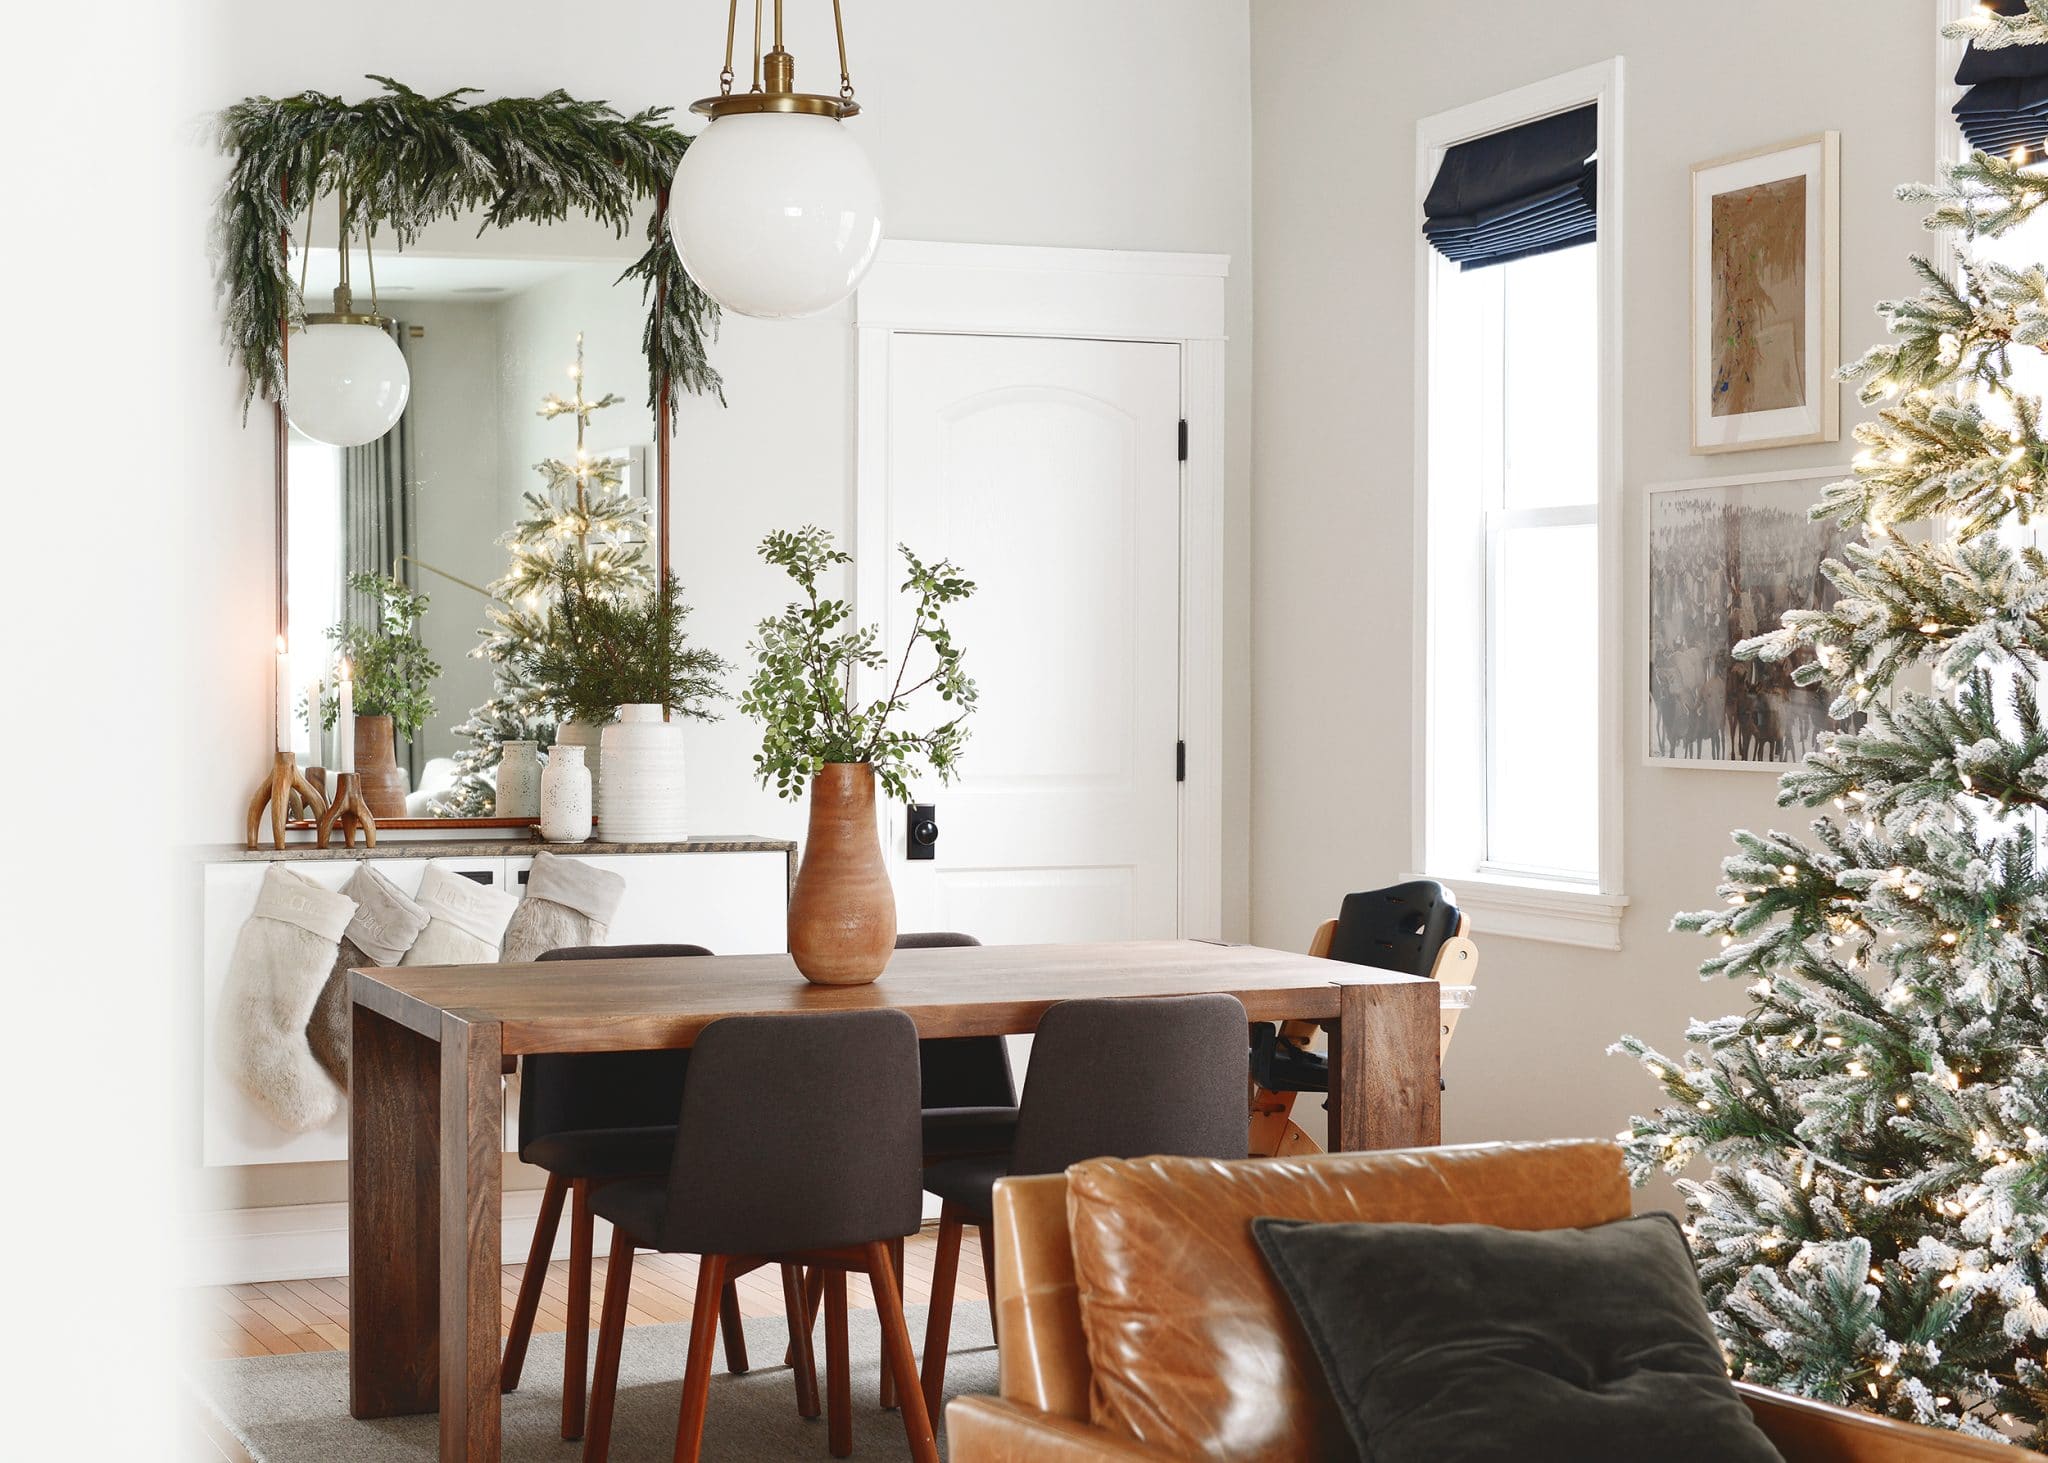 A living and dining room decked out in holiday decor, faux garland and faux tree | Which flocking spray is best? | How to flock your own holiday garland, tree and decor, via Yellow Brick Home